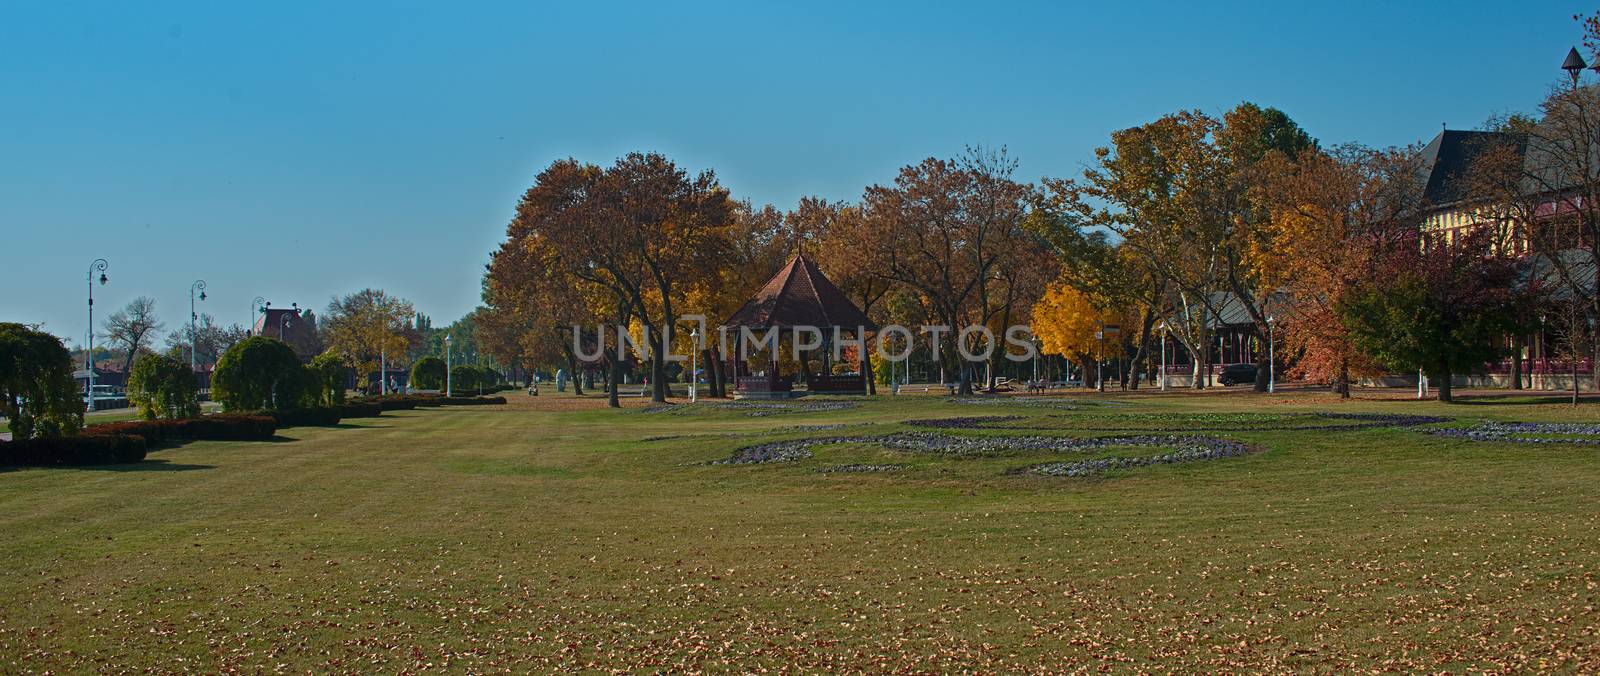 Open shed in park surrounded with trees during autumn time by sheriffkule